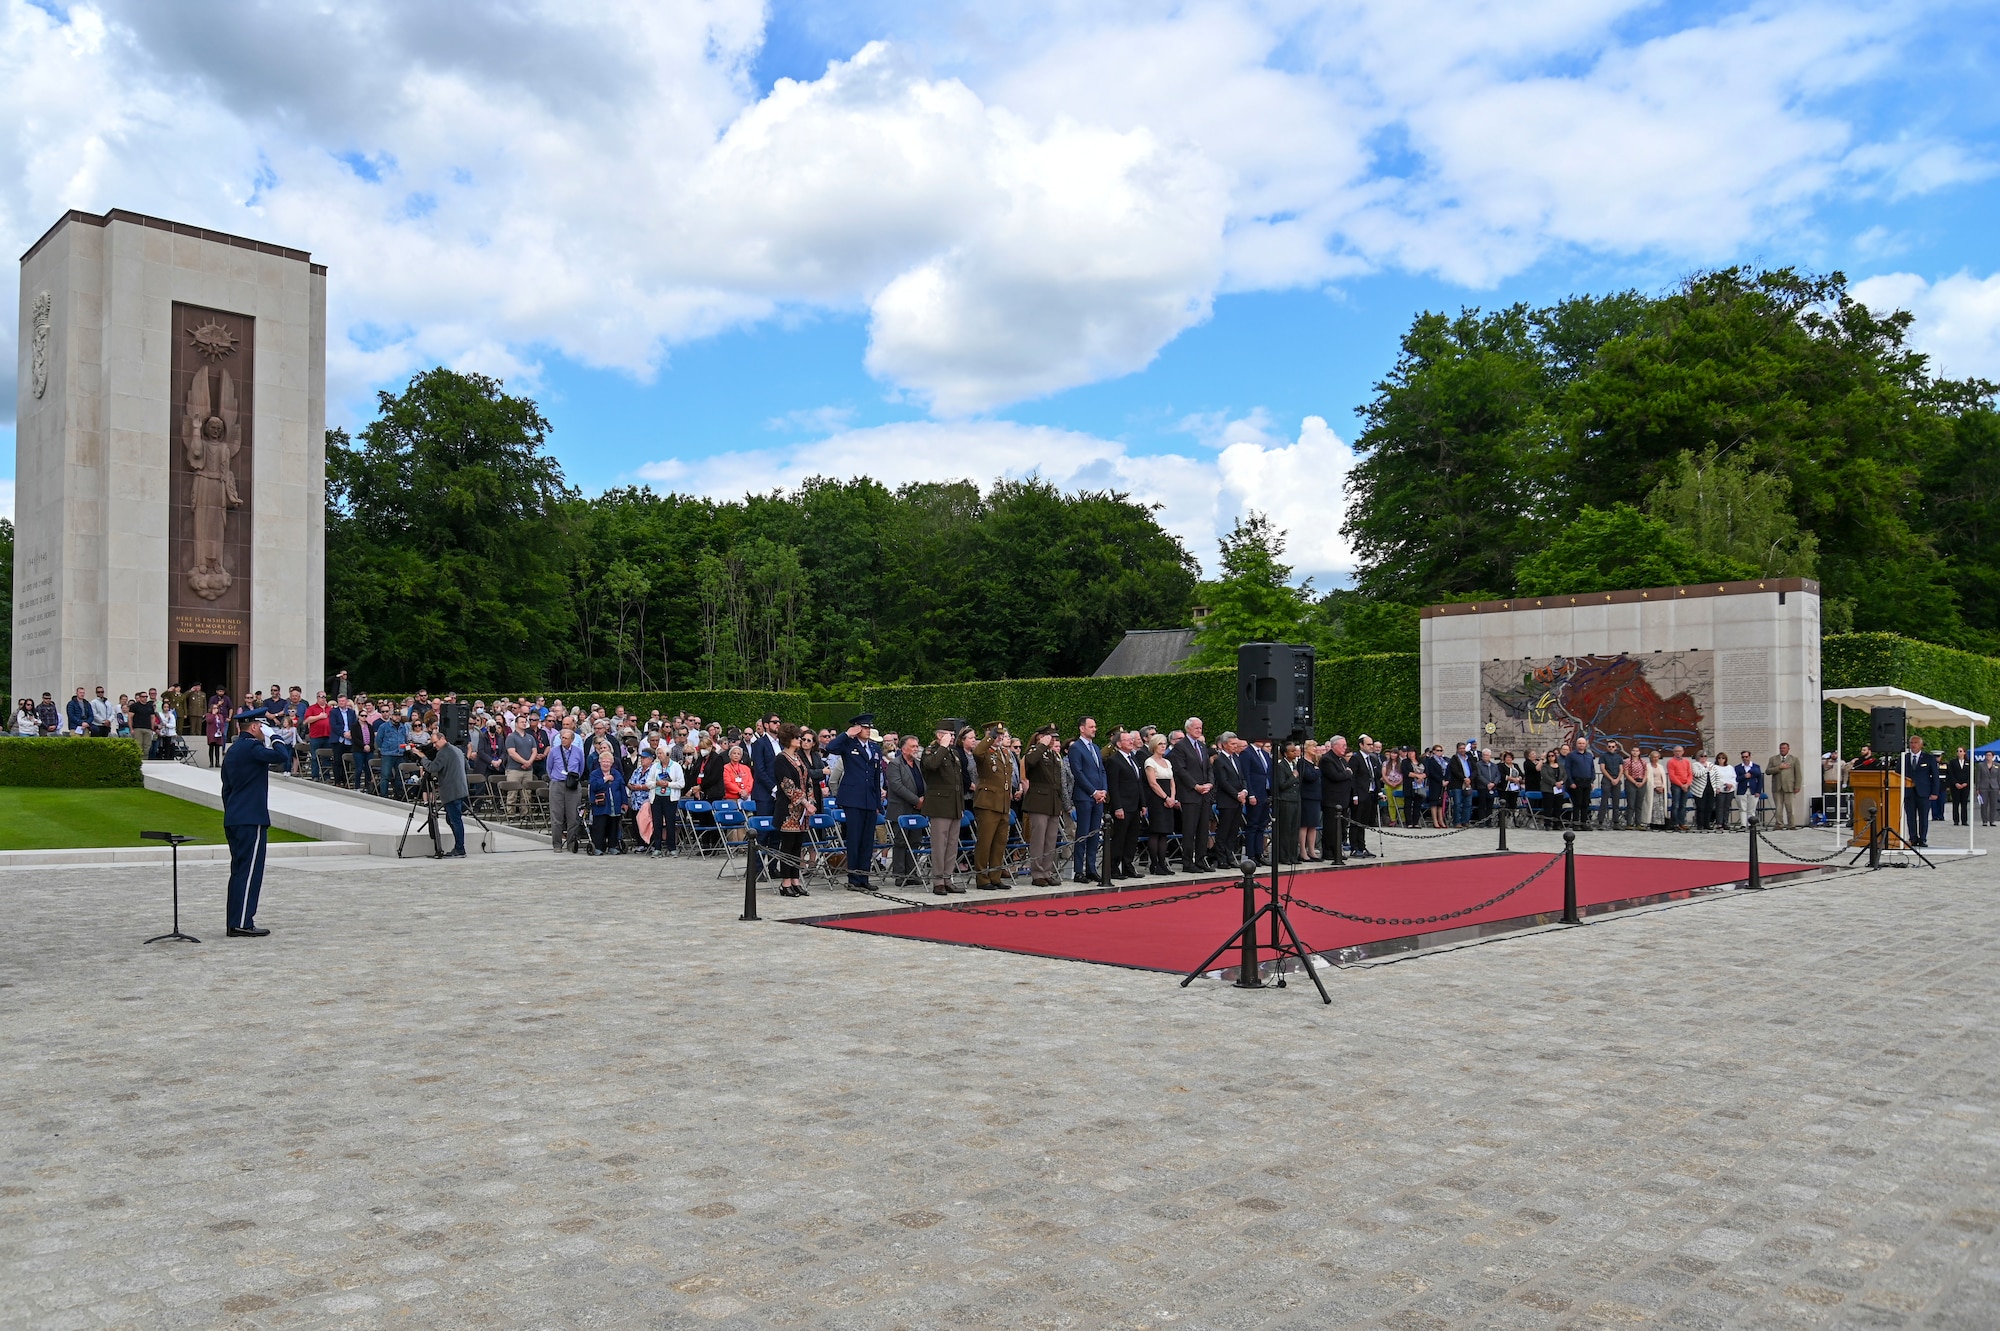 Spectators stand and salute during a Memorial Day event at the Luxembourg American Military cemetery in Luxembourg on May 28, 2022. Hundreds of military members and military supporters joined together to pay their respects to the men and women who lost their lives during World War II. (U.S. Air Force photo by Airman 1st Class Jessica Sanchez-Chen)